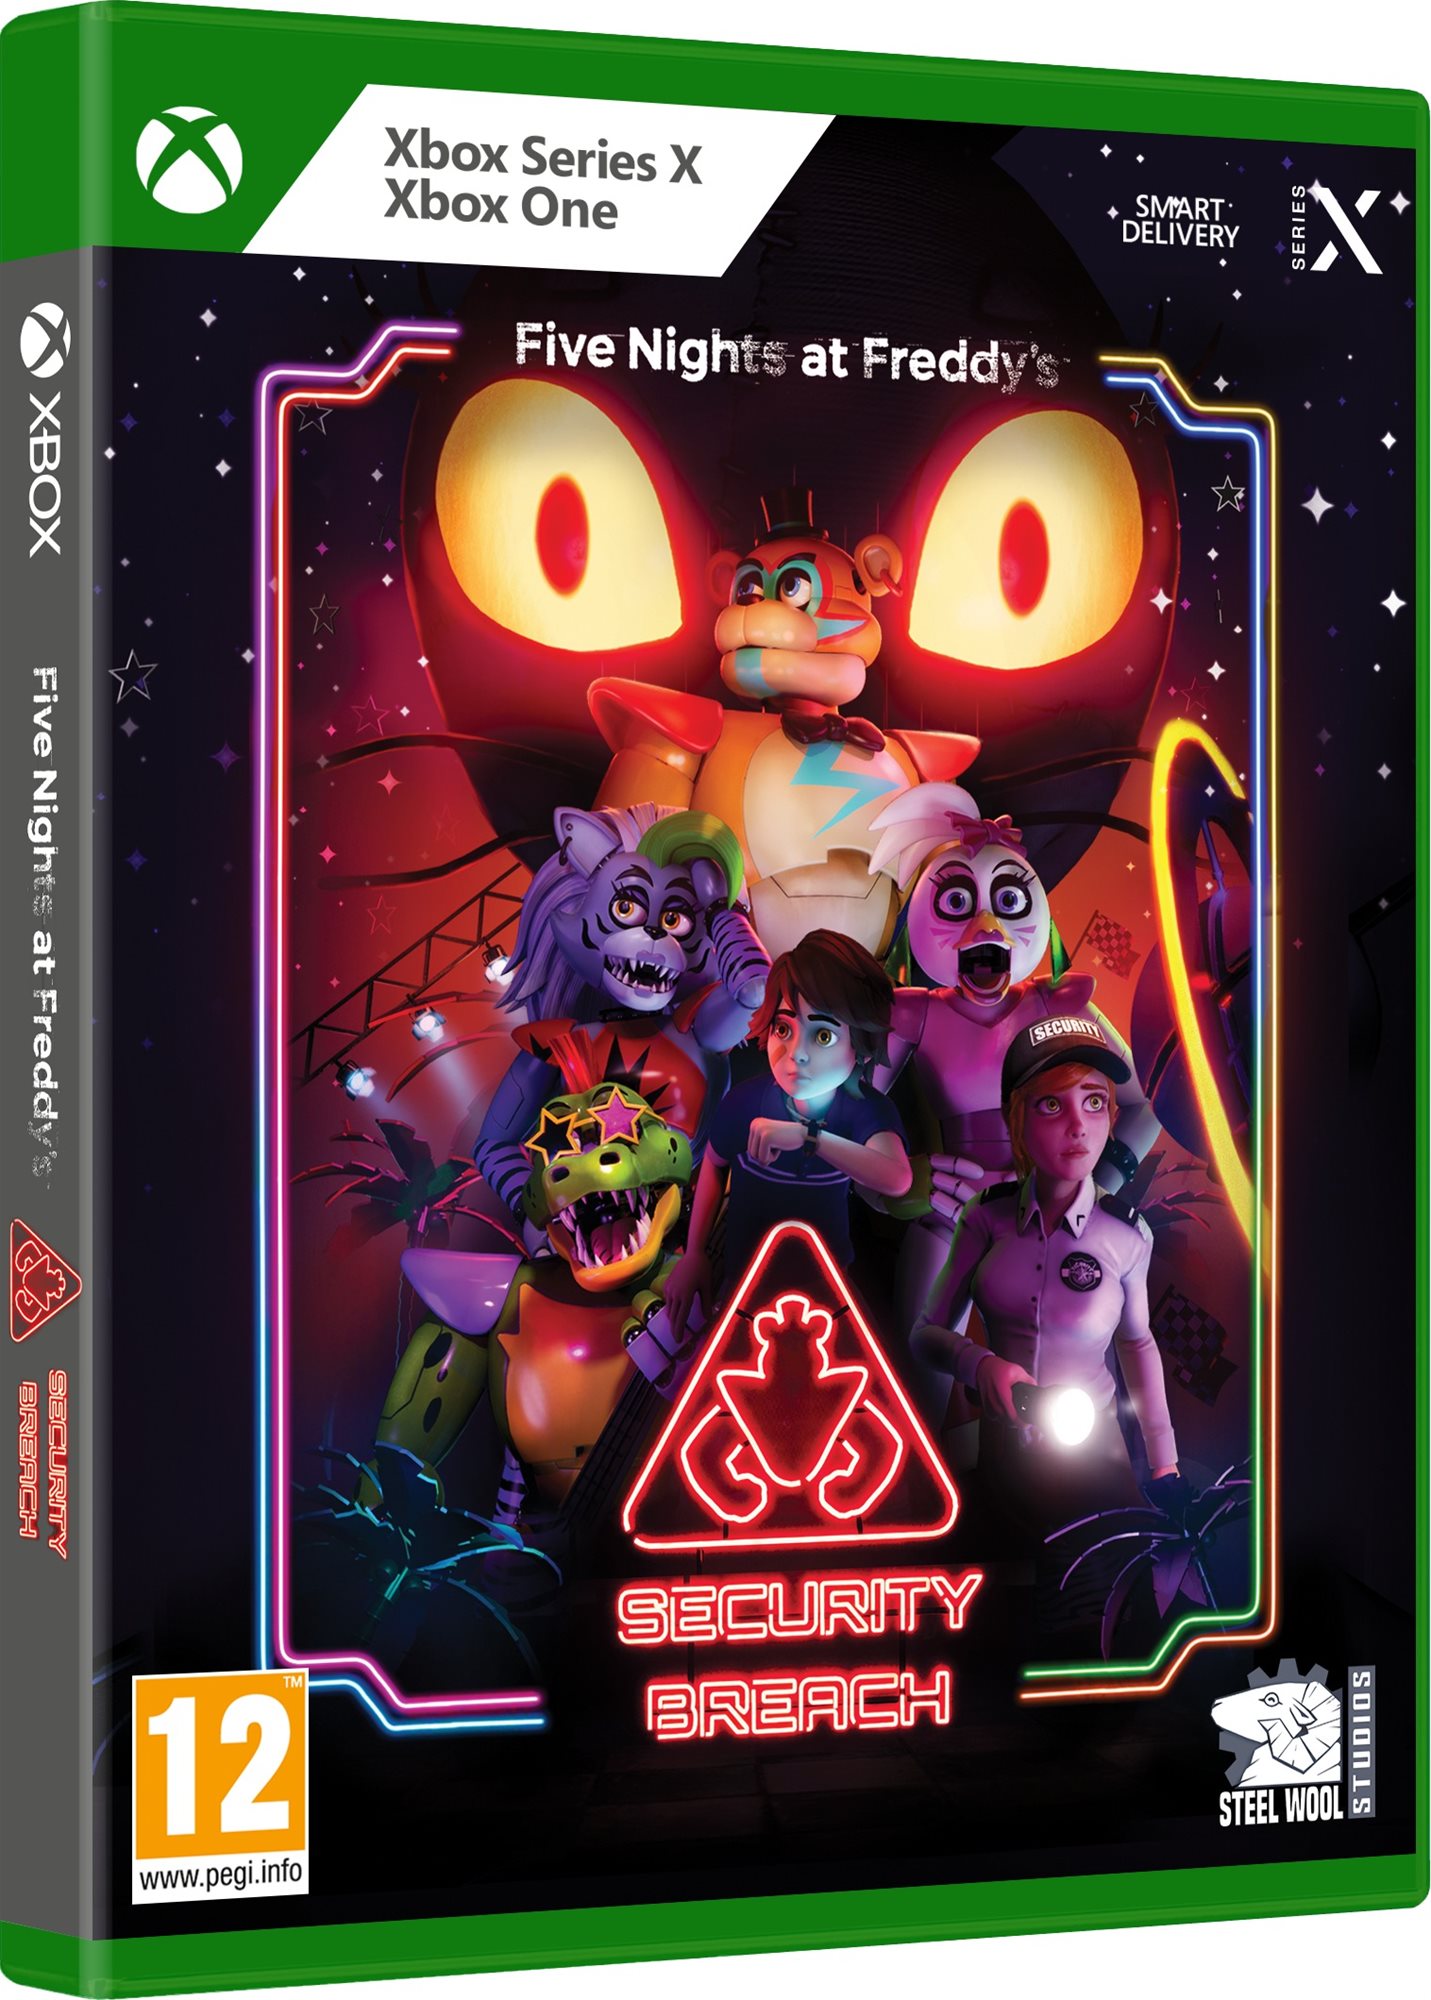 Five Nights at Freddys: Security Breach - Xbox Series